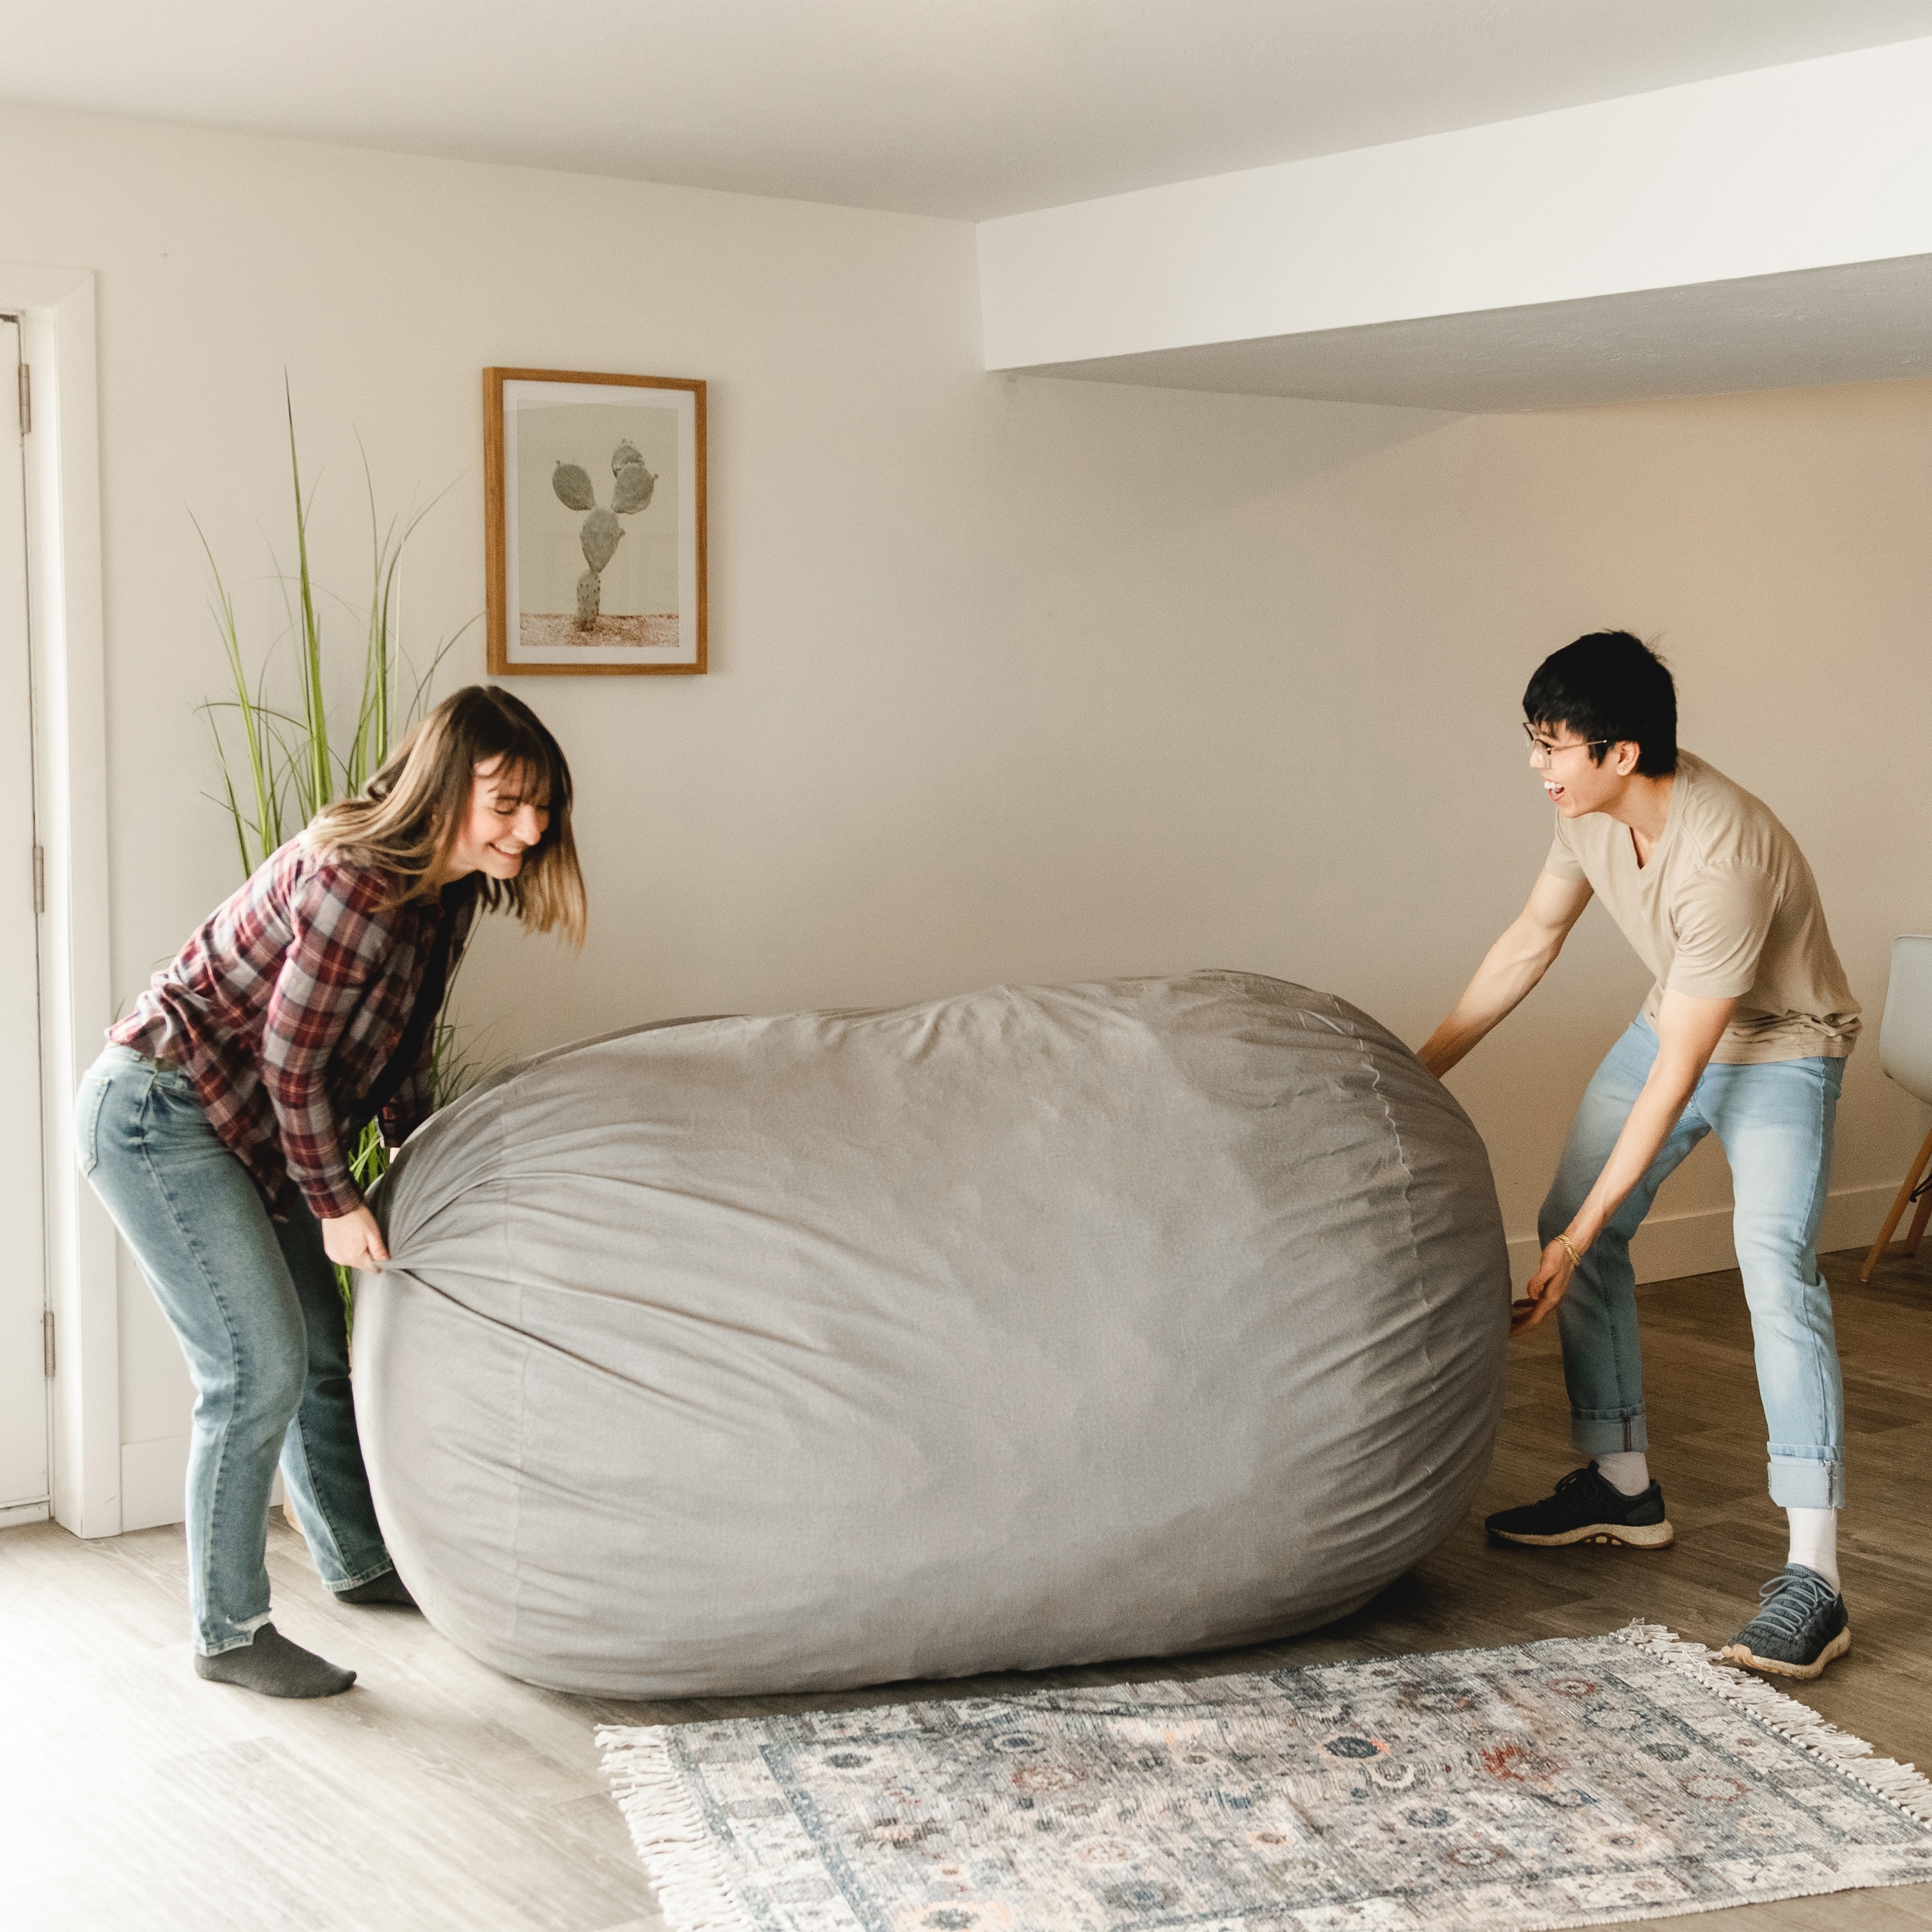 https://ak1.ostkcdn.com/images/products/is/images/direct/1b3893211e6e8d3d27e83305099ed441f82c2035/Big-Joe-XL-Fuf-Bean-Bag-Chair-%28Removable-Cover%29.jpg